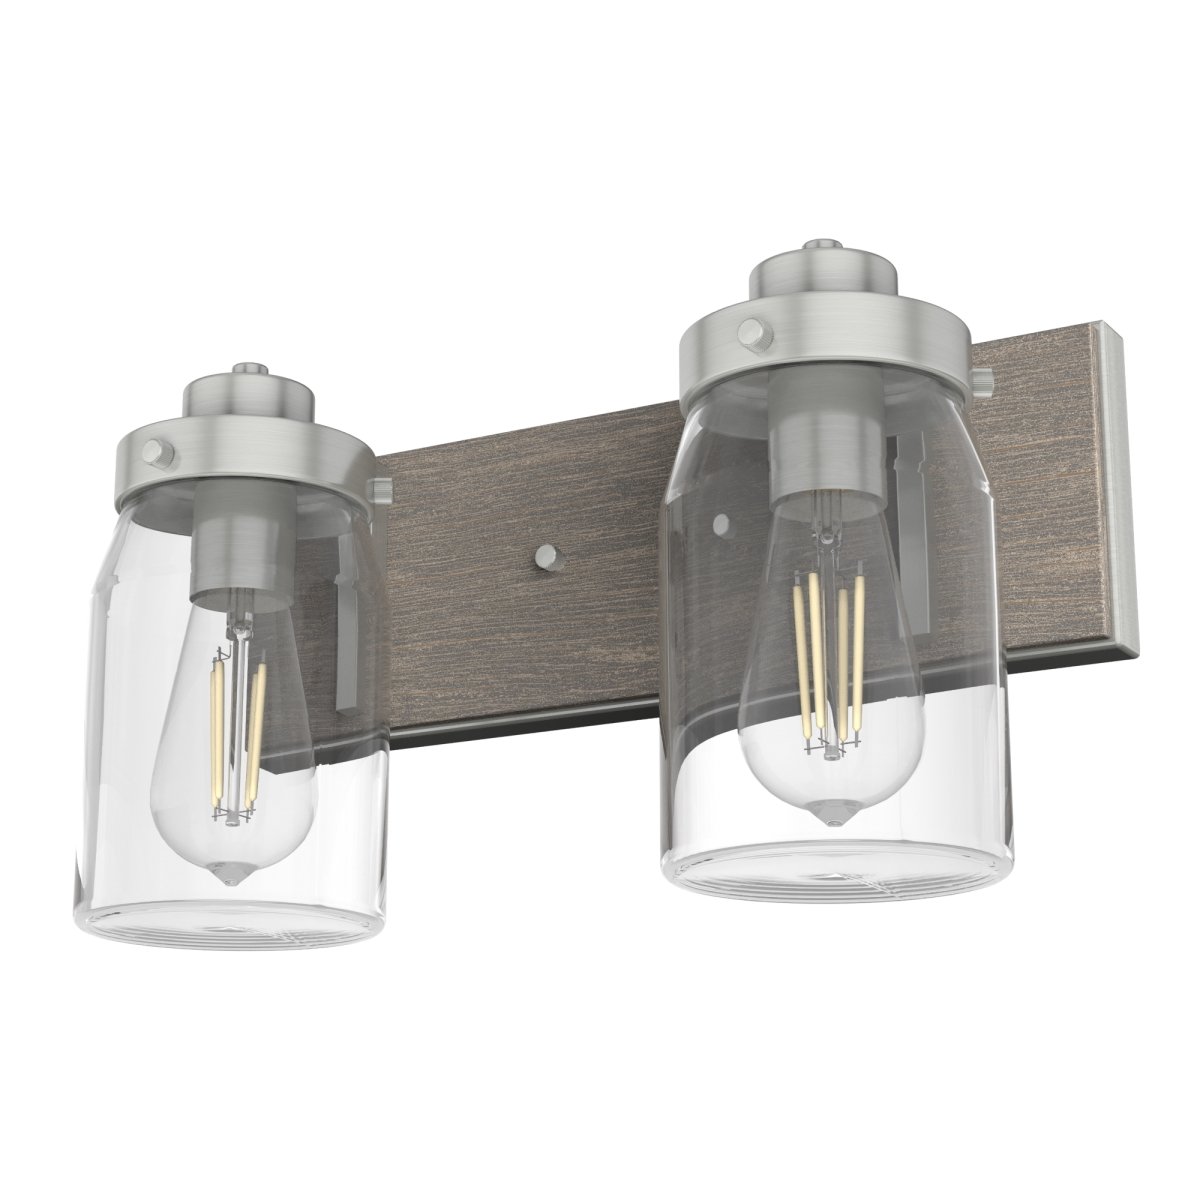 Picture of Hunter 48019 8.5 in. Devon Park Brushed Nickel & Gray Wood with Clear Glass 2 Light Bathroom Vanity Wall Light Fixture